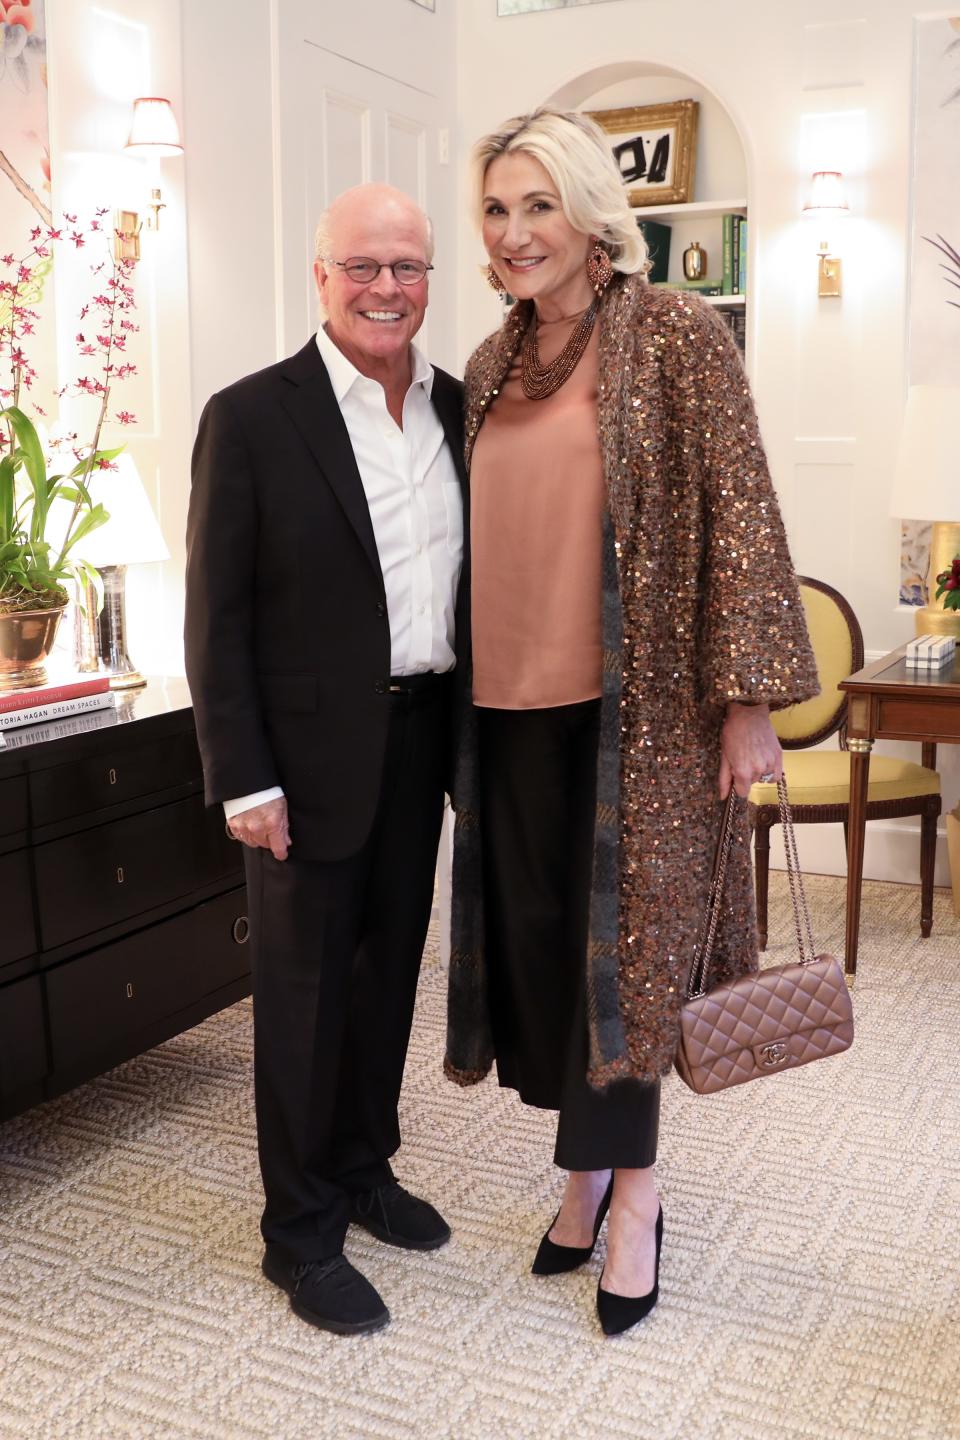 Kips Bay Decorator Show House Opens with a Packed Viewing Party